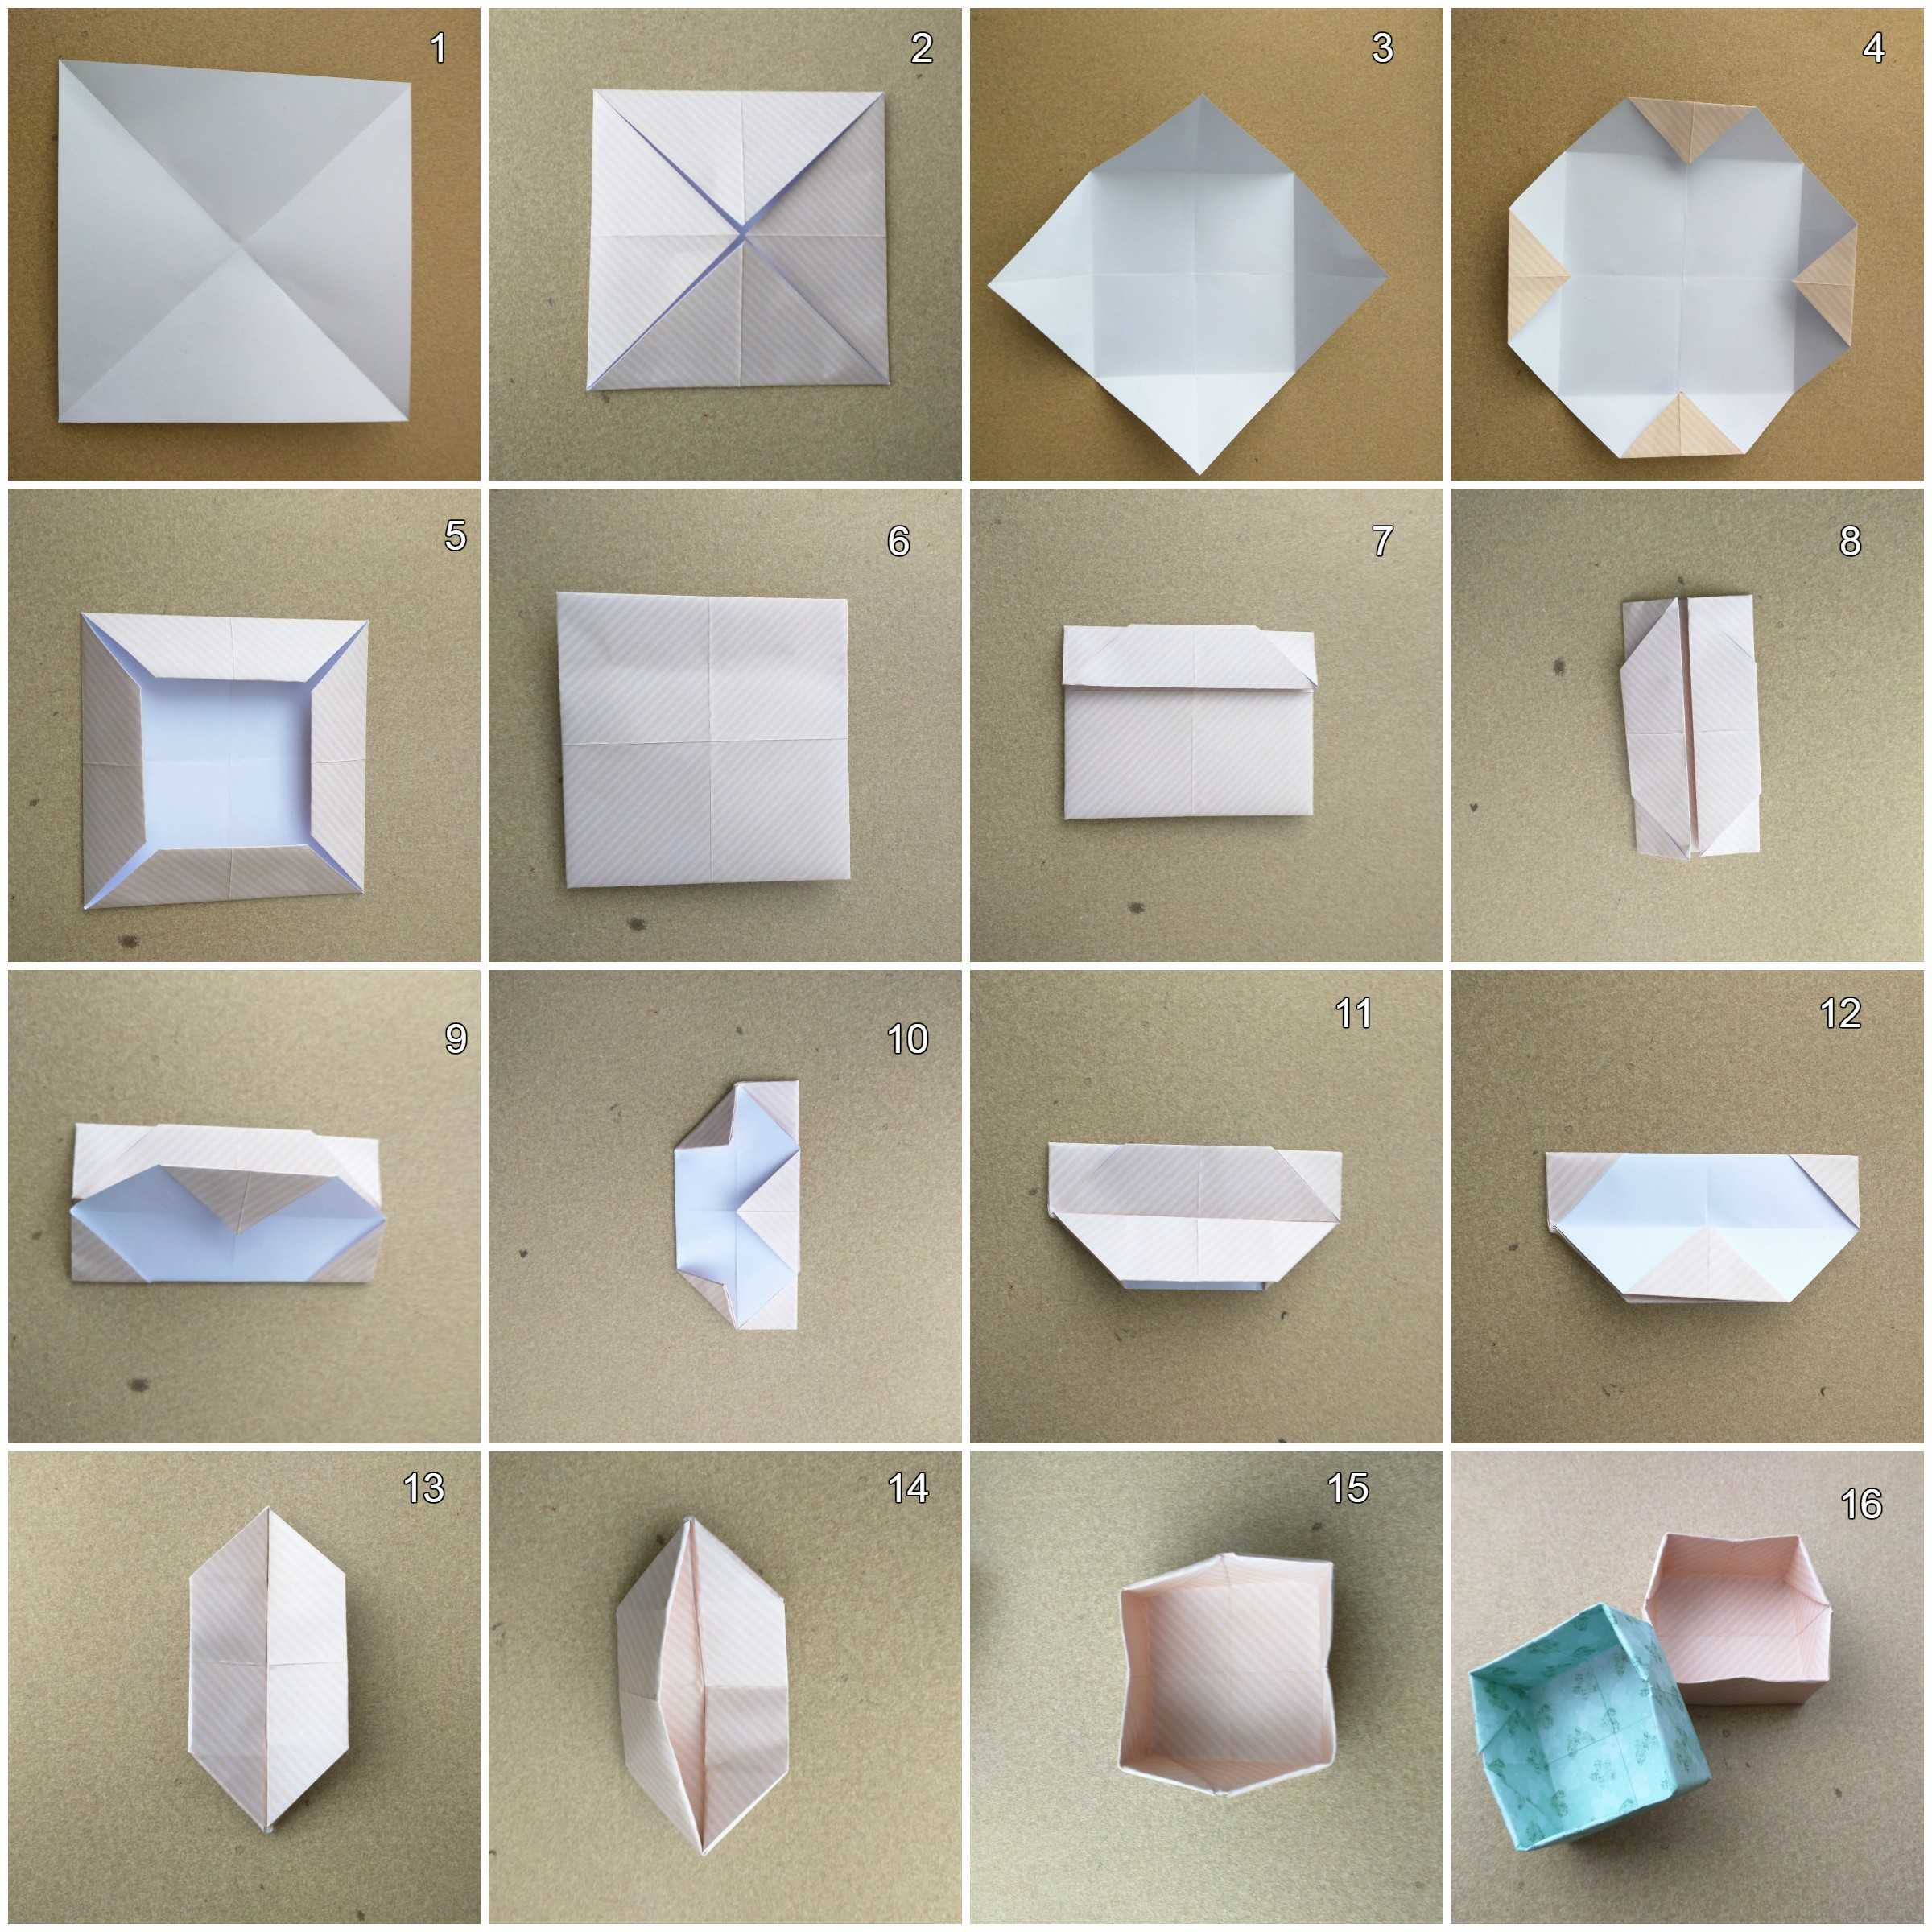 How To Make A Origami Paper Box How To Make Origami Box